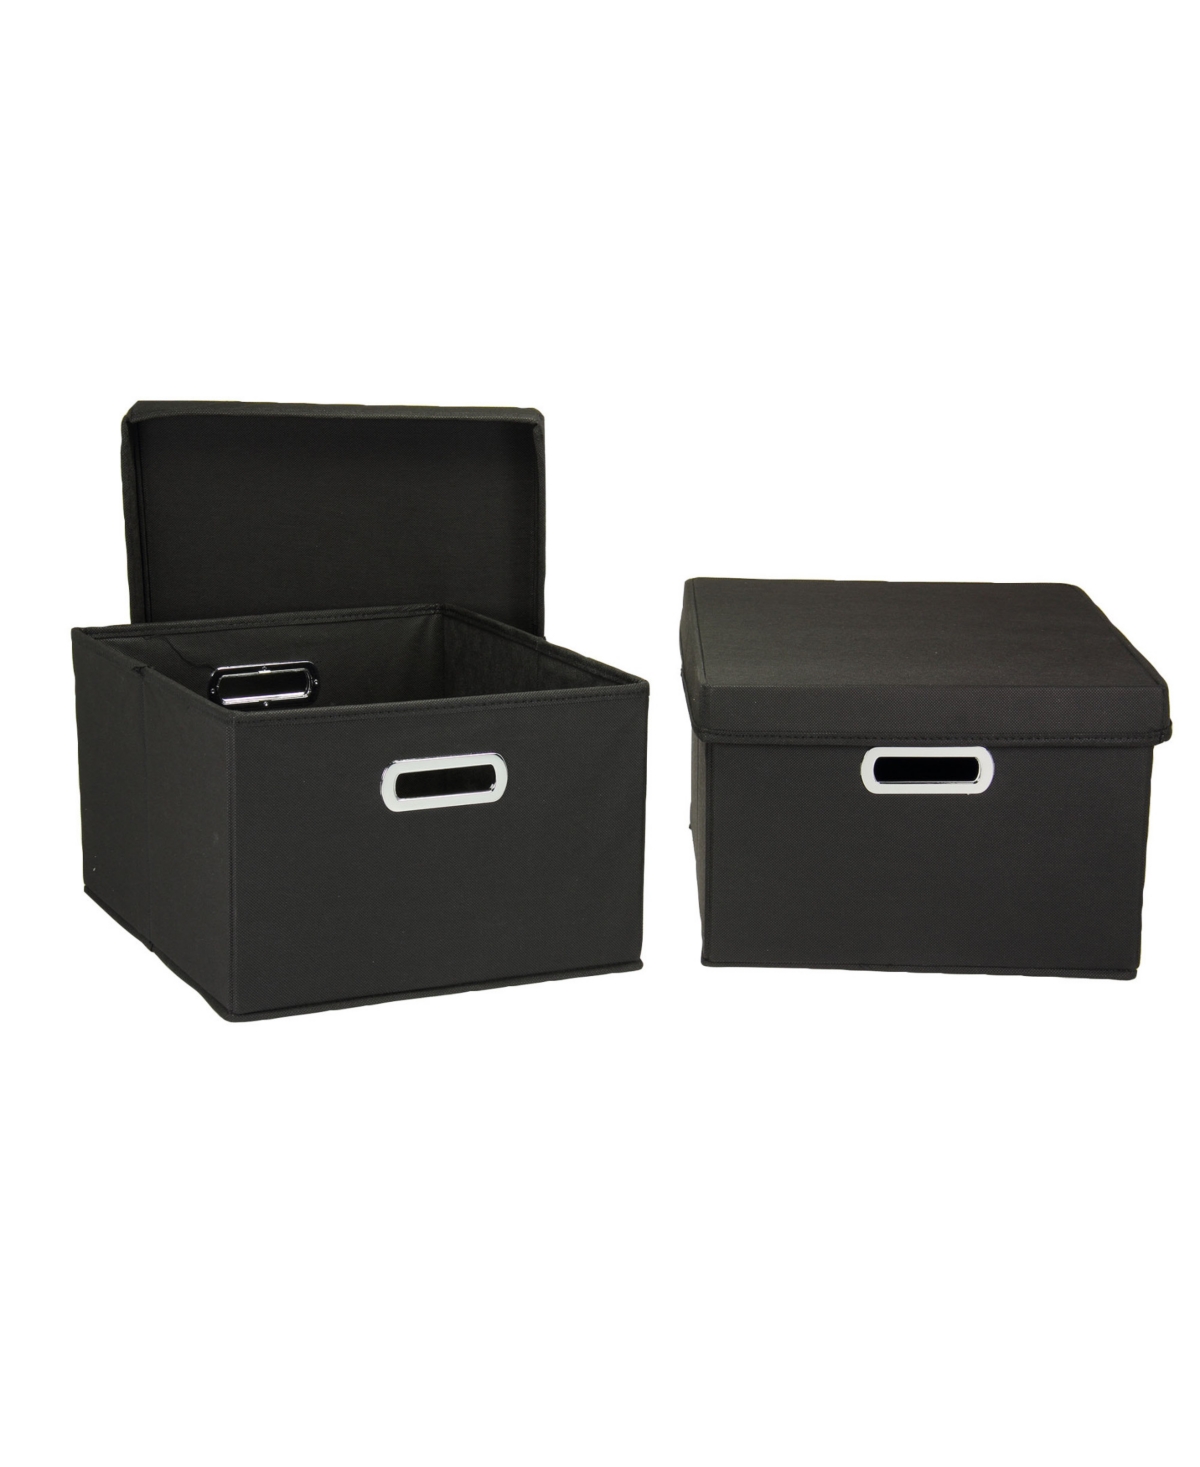 Household Essentials Boxes With Lids, Kd, Set Of 2 In Matte Black